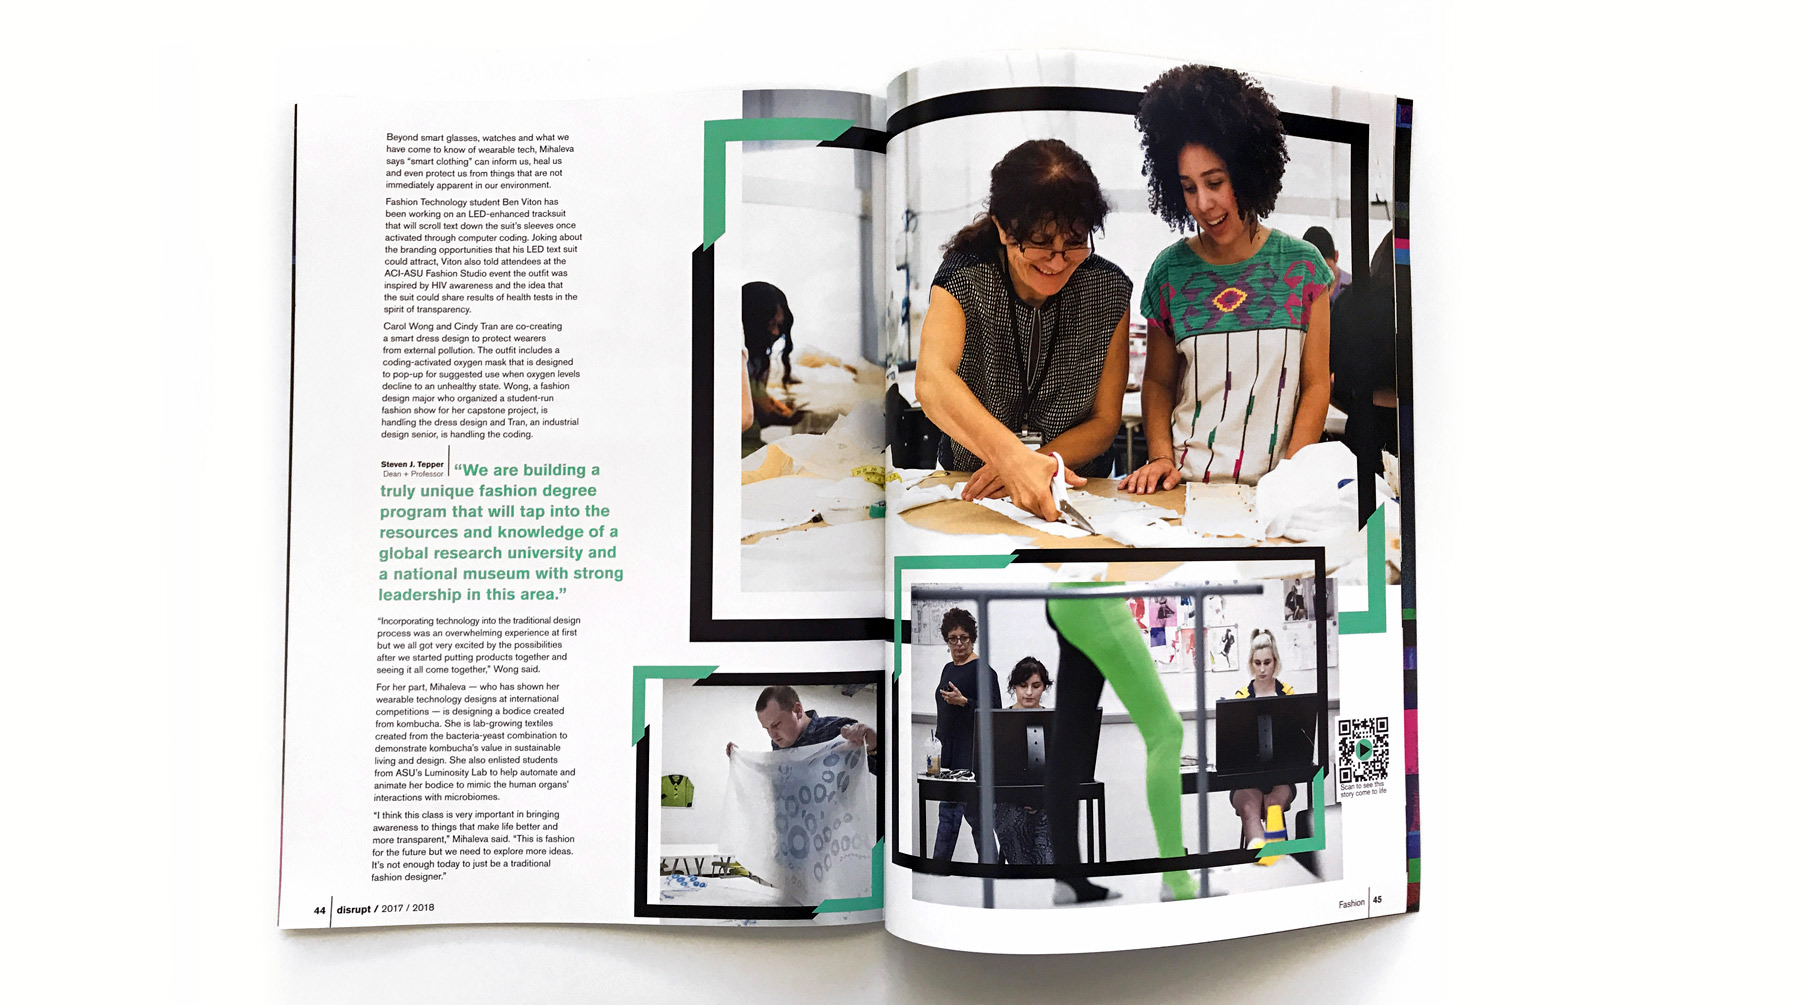 Magazine spread with article text, pull quote, and 3 photos of fashion students in classrooms